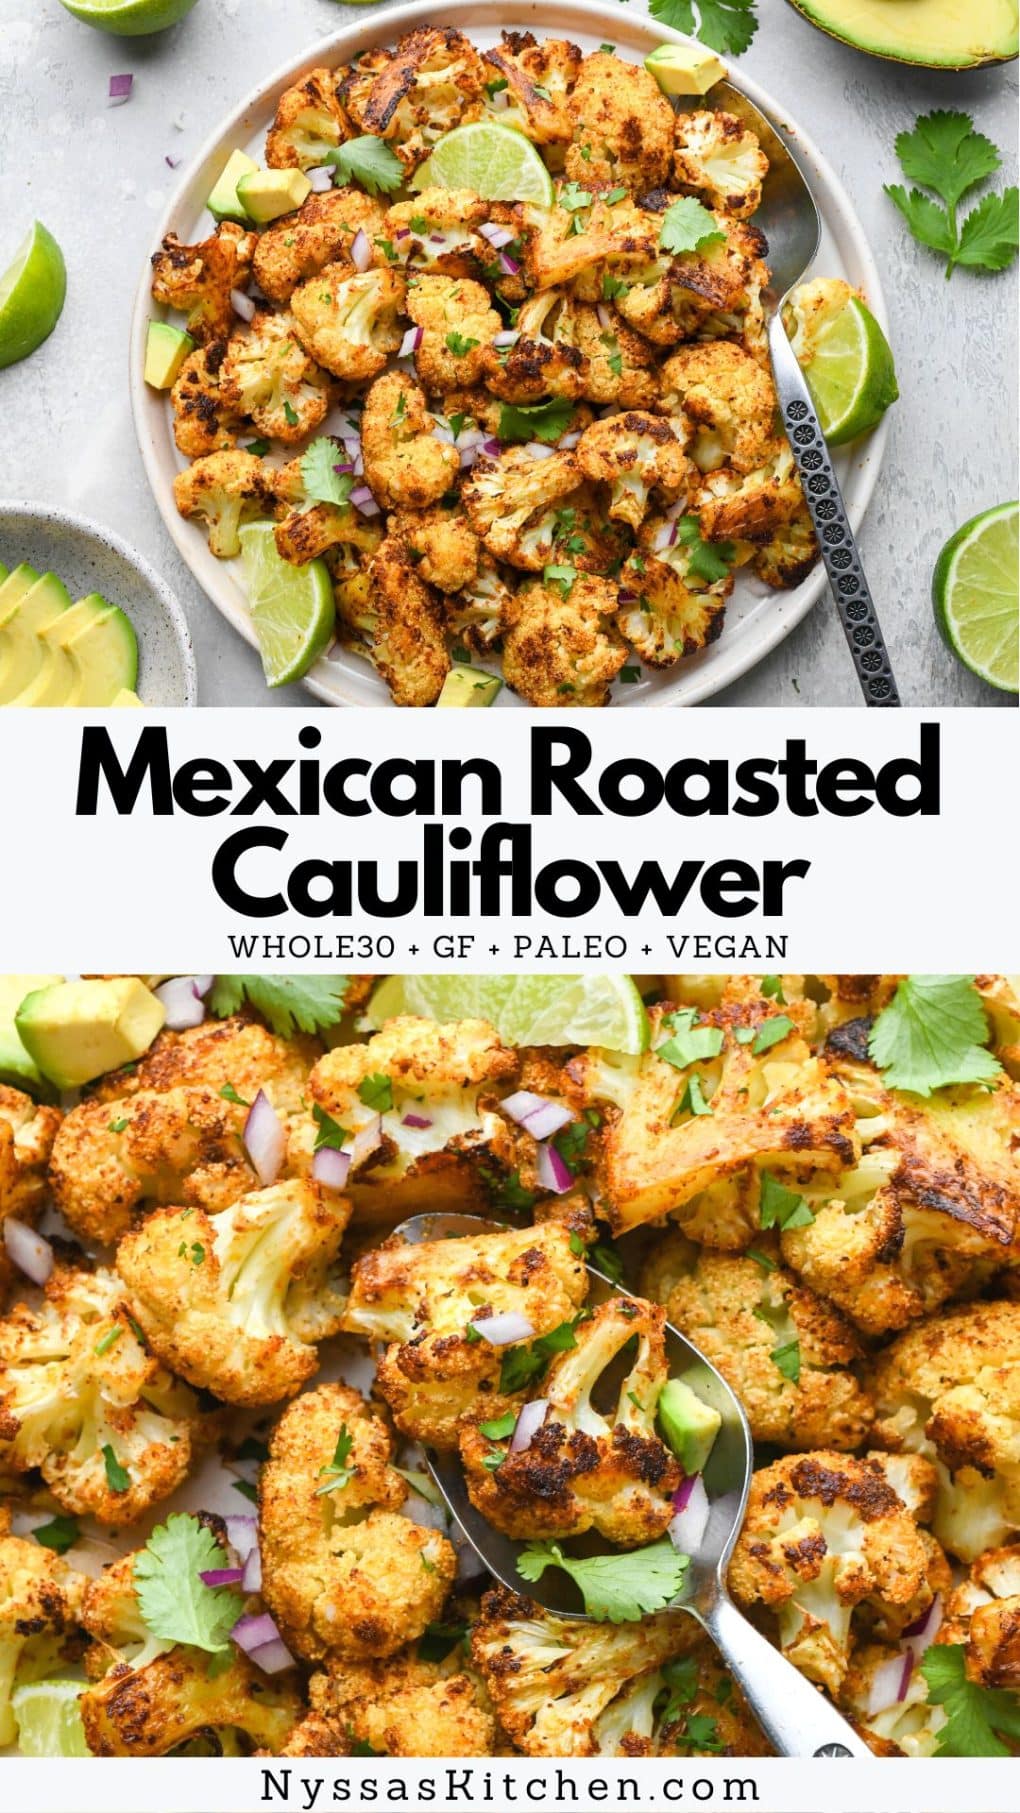 Pinterest pin for Mexican roasted cauliflower.